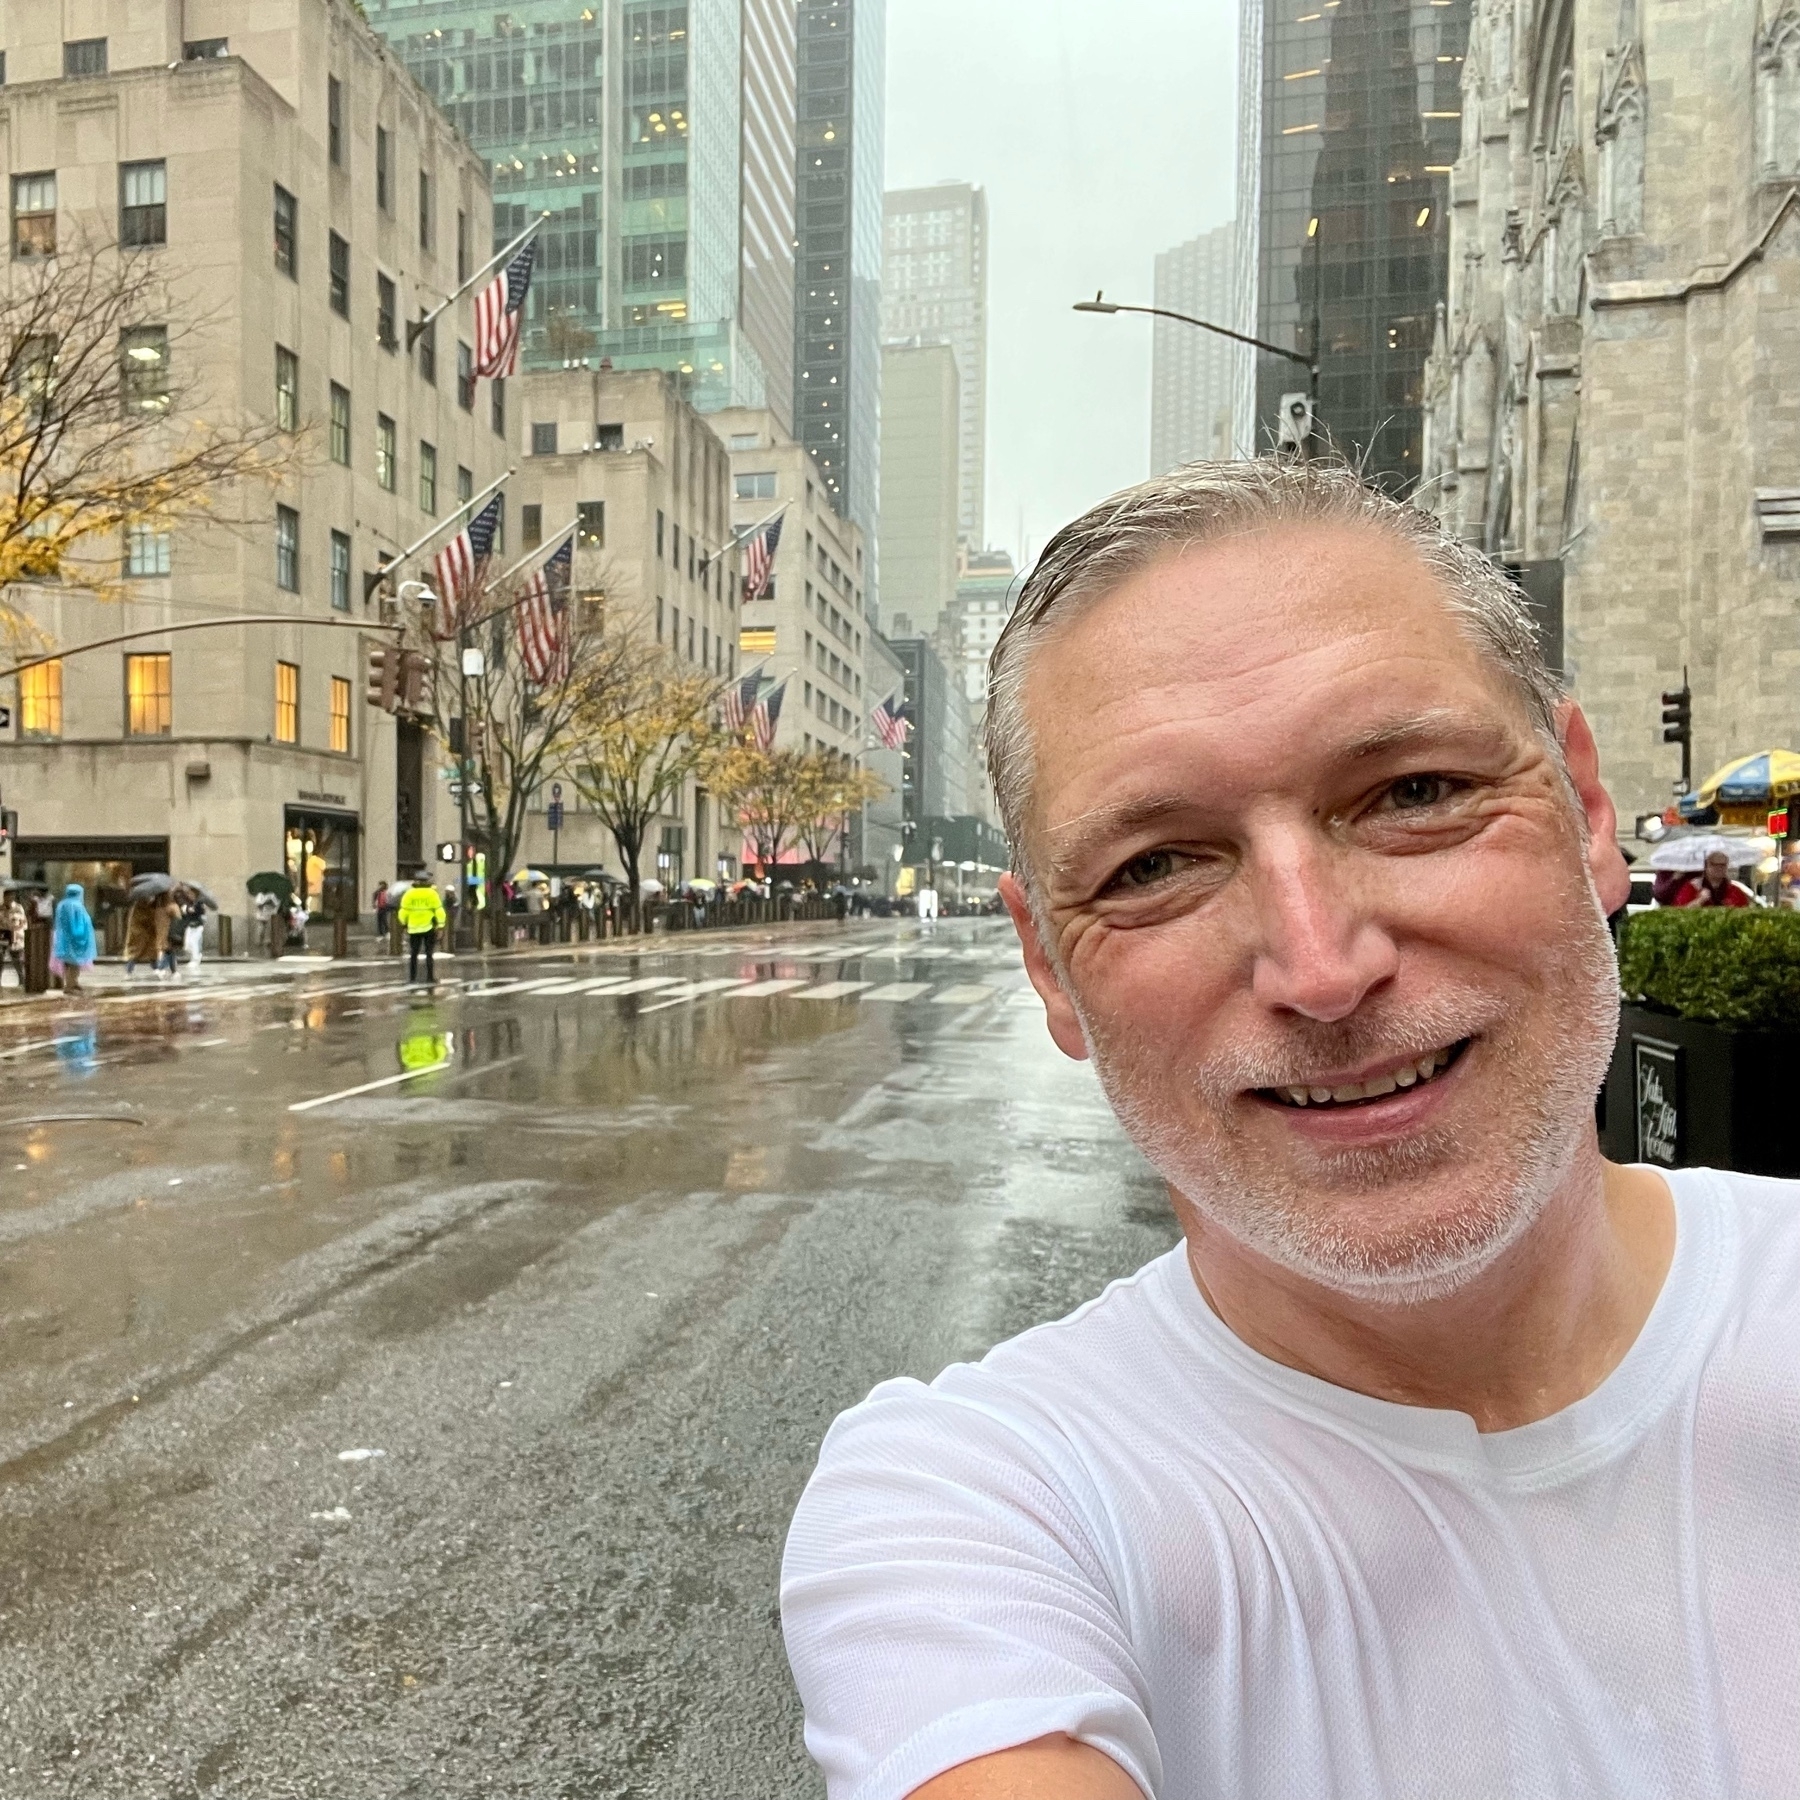 selfie against backdrop of rainy fifth Avenue. Soaked to the bone in running gear.